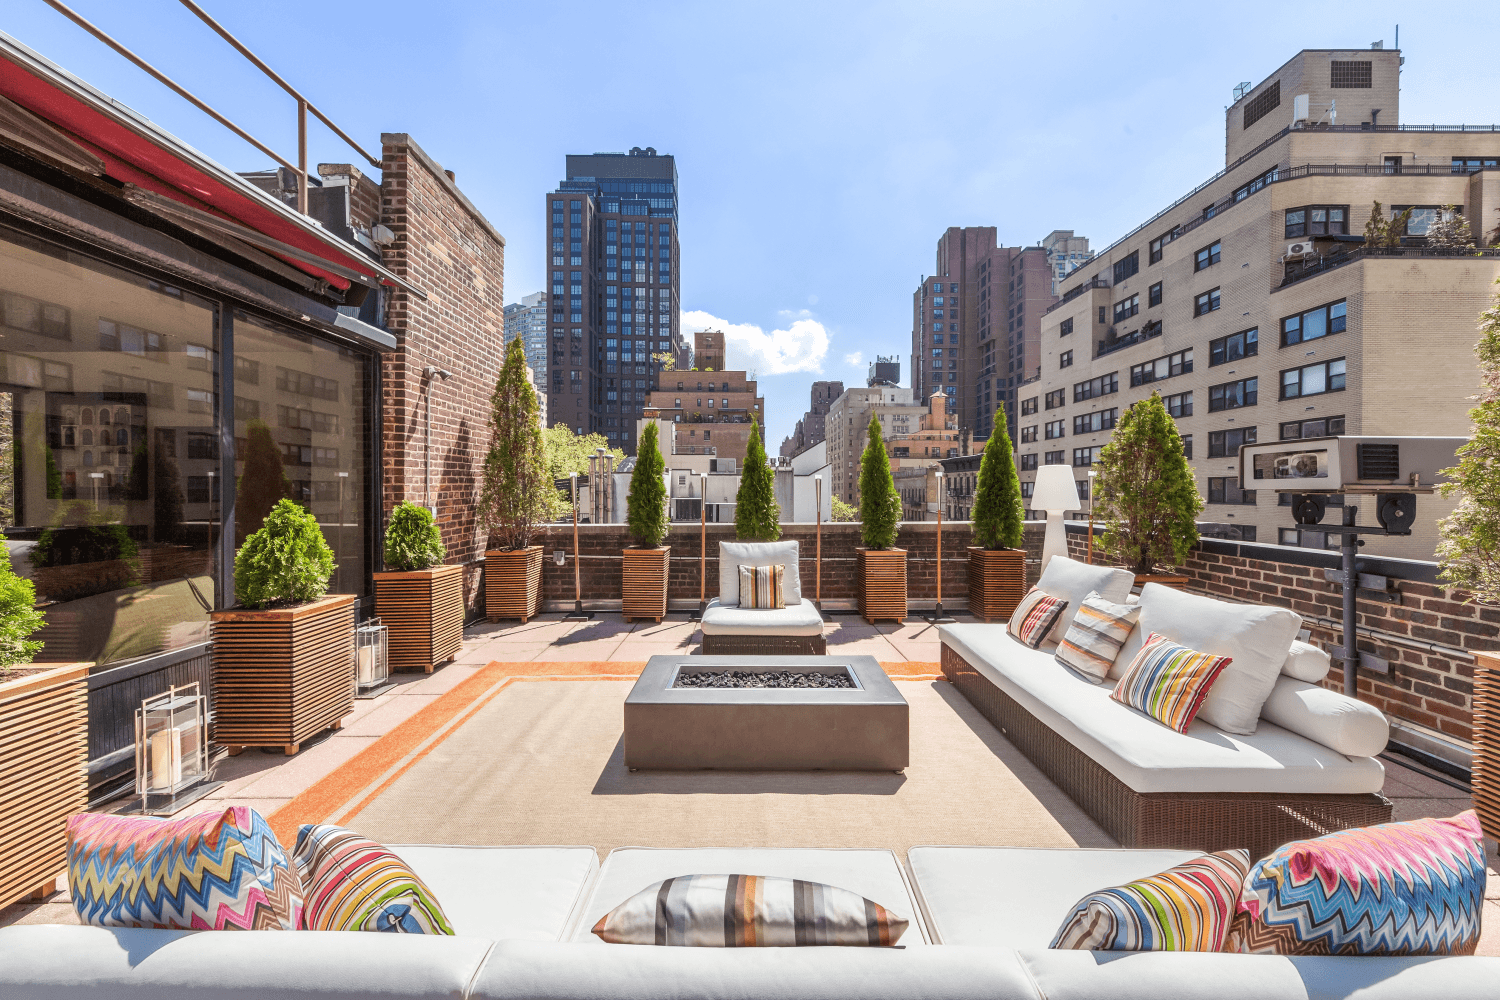 South Facing 4 bedroom legally 5 bedroom duplex penthouse with a 1, 400 sq ft terrace in the heart of Midtown East.